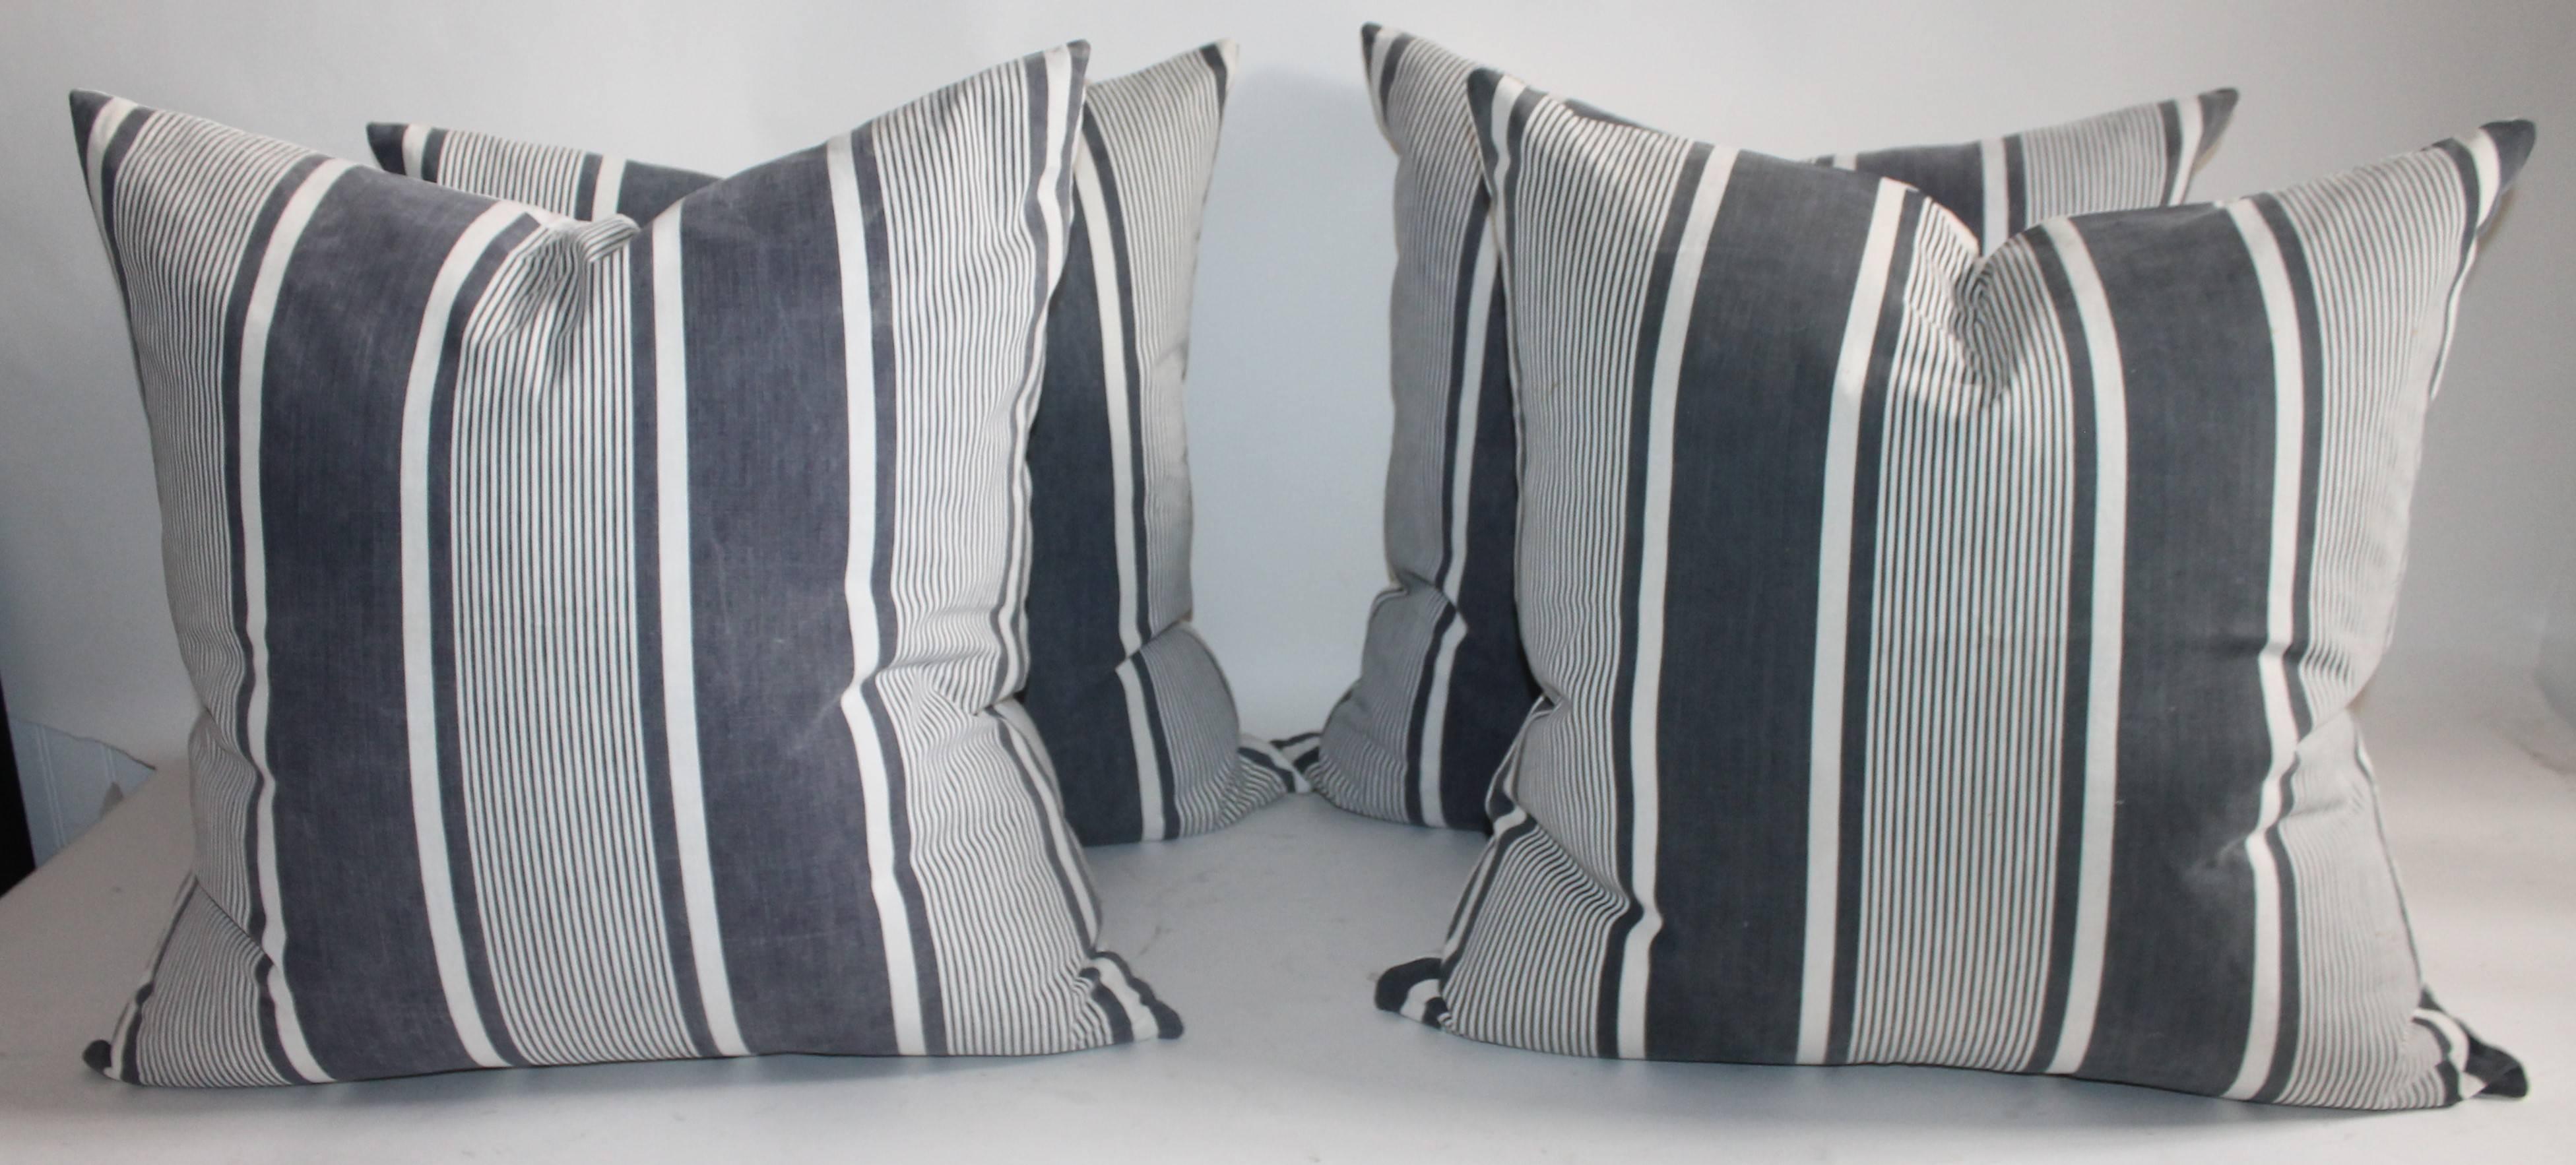 This group of four 19th century French black and white striped ticking pillows are in great as found condition. The faded black looks a little like grey in some lighting. The backing is in a white homespun linen. The inserts are down and feather